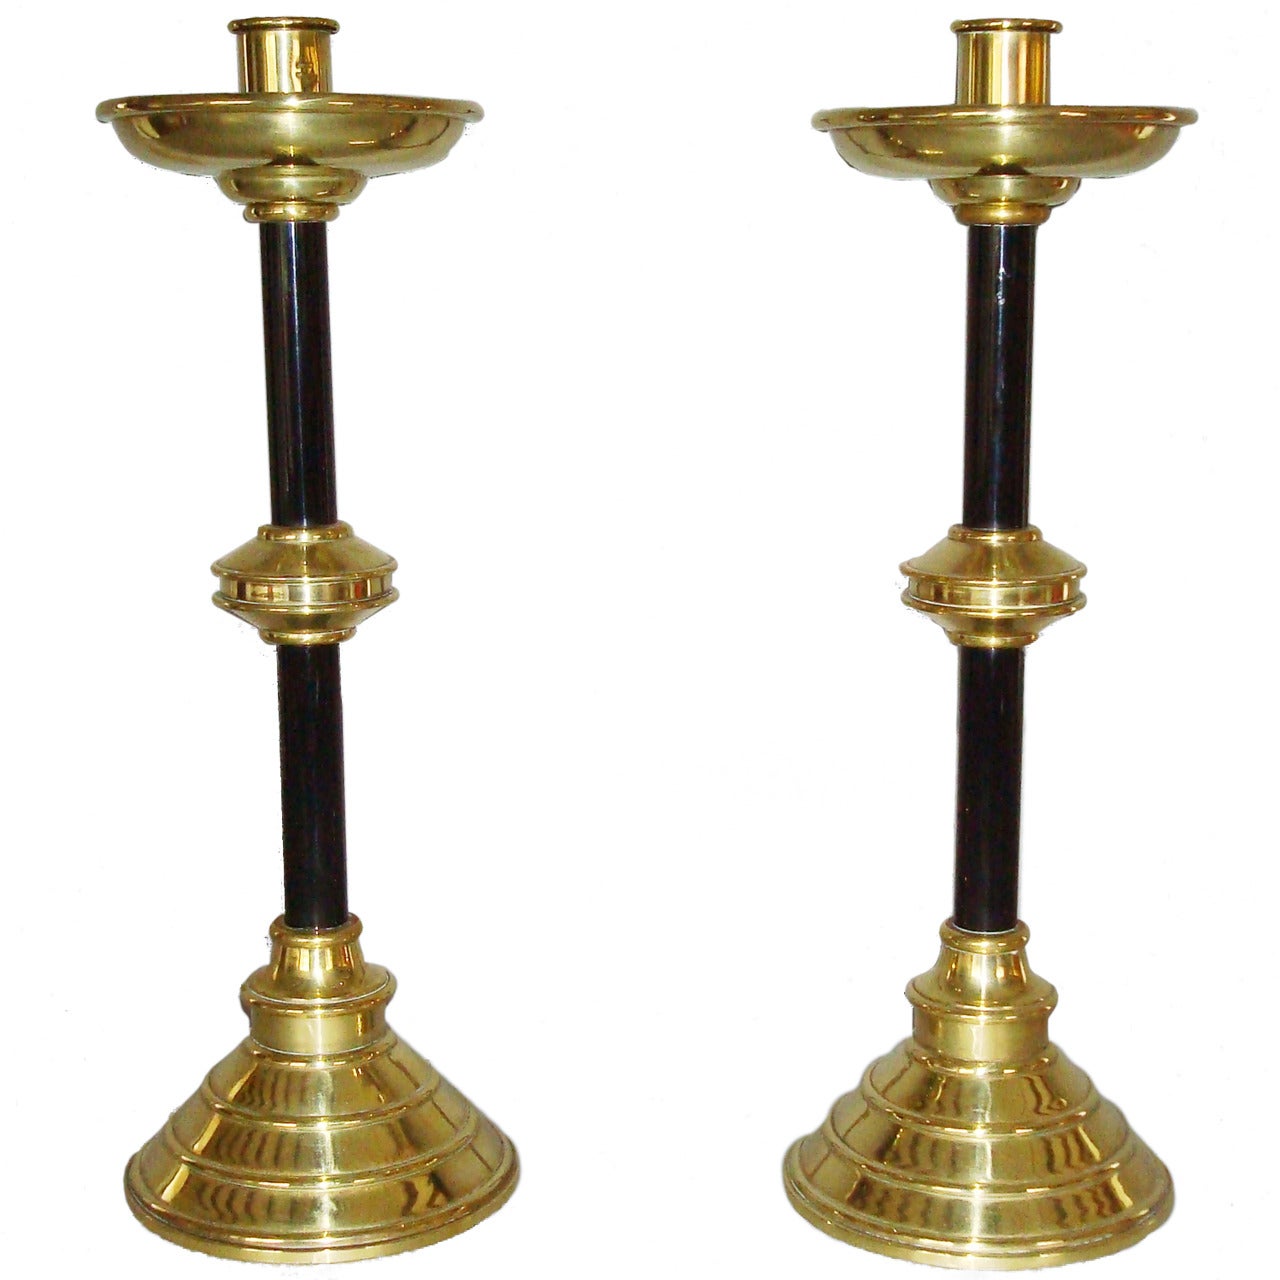 A C19th Pair of Candlesticks of Ecclesiastical Design For Sale